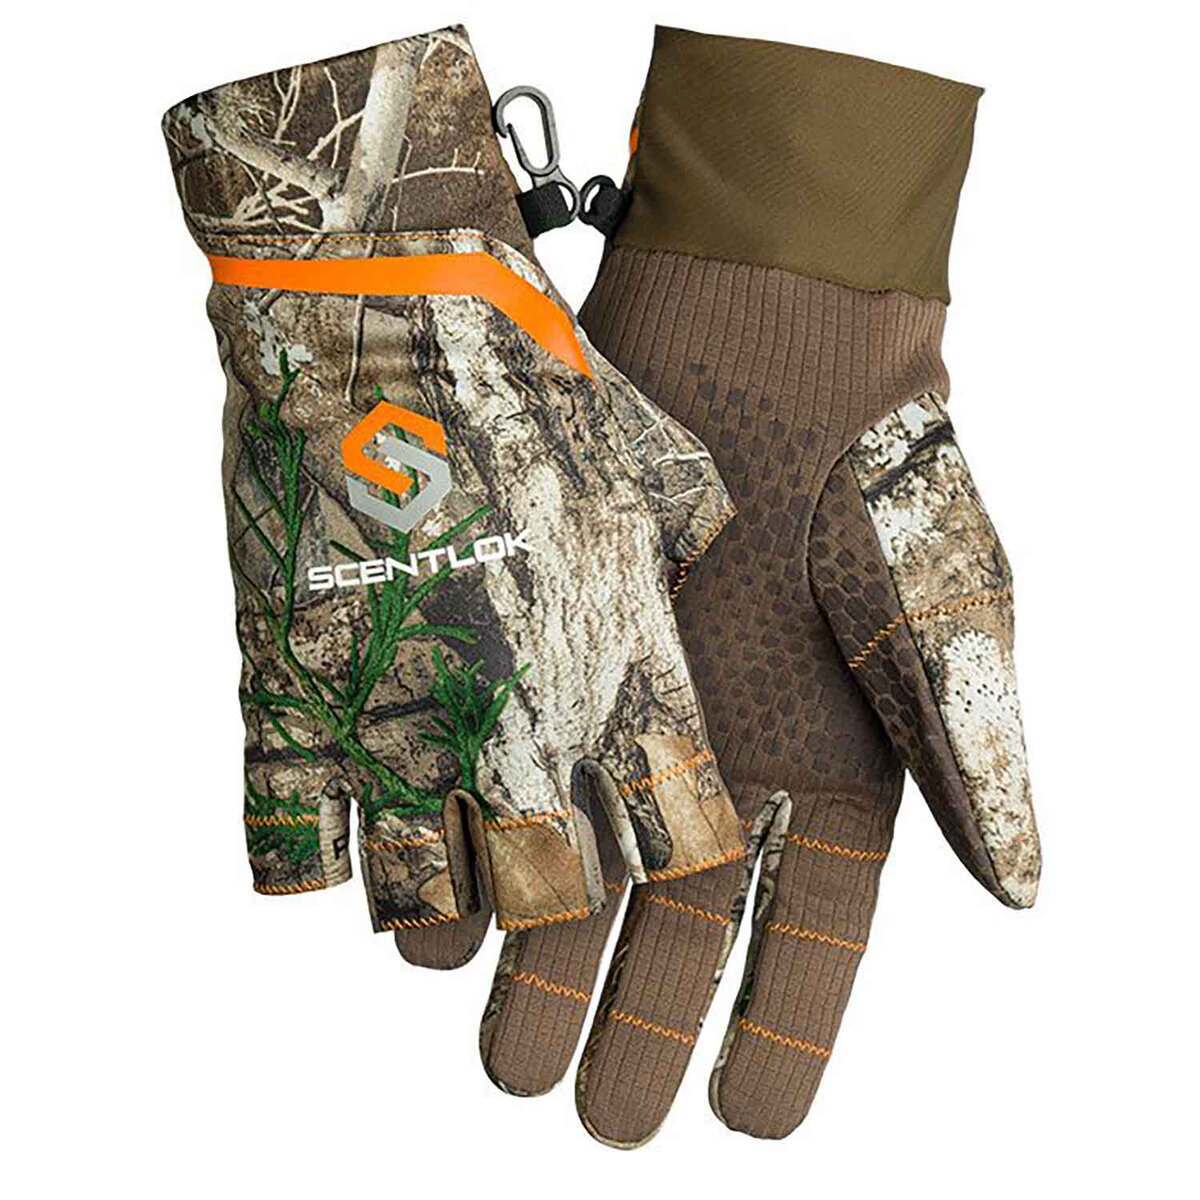 Huntworth Men's Gunner Midweight Hunting Gloves Realtree Timber, Size M/L, Size: Medium/Large